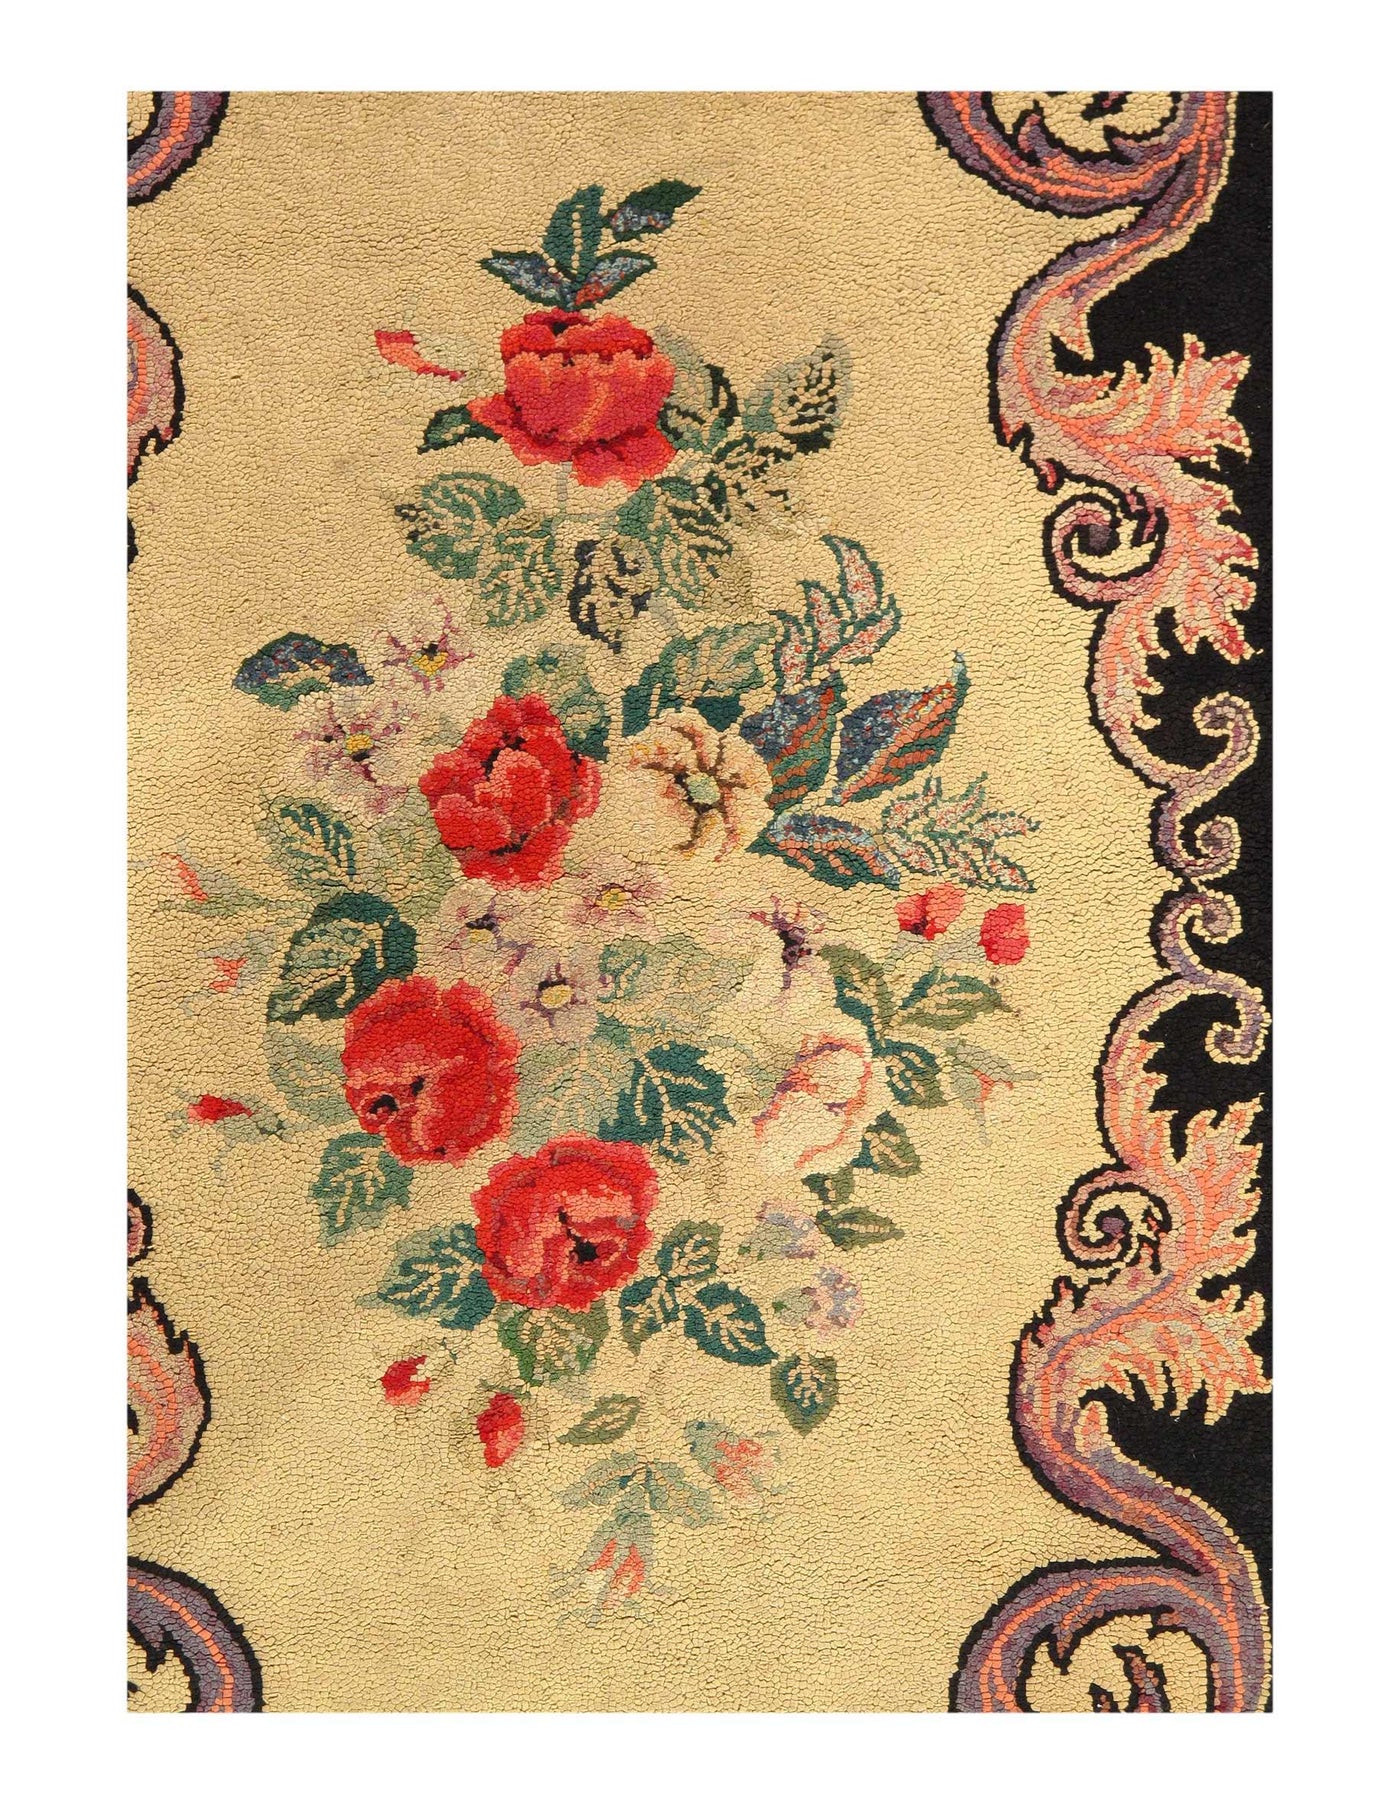 Canvello American Antique Hooked Rug 2'4'' X 4'7''